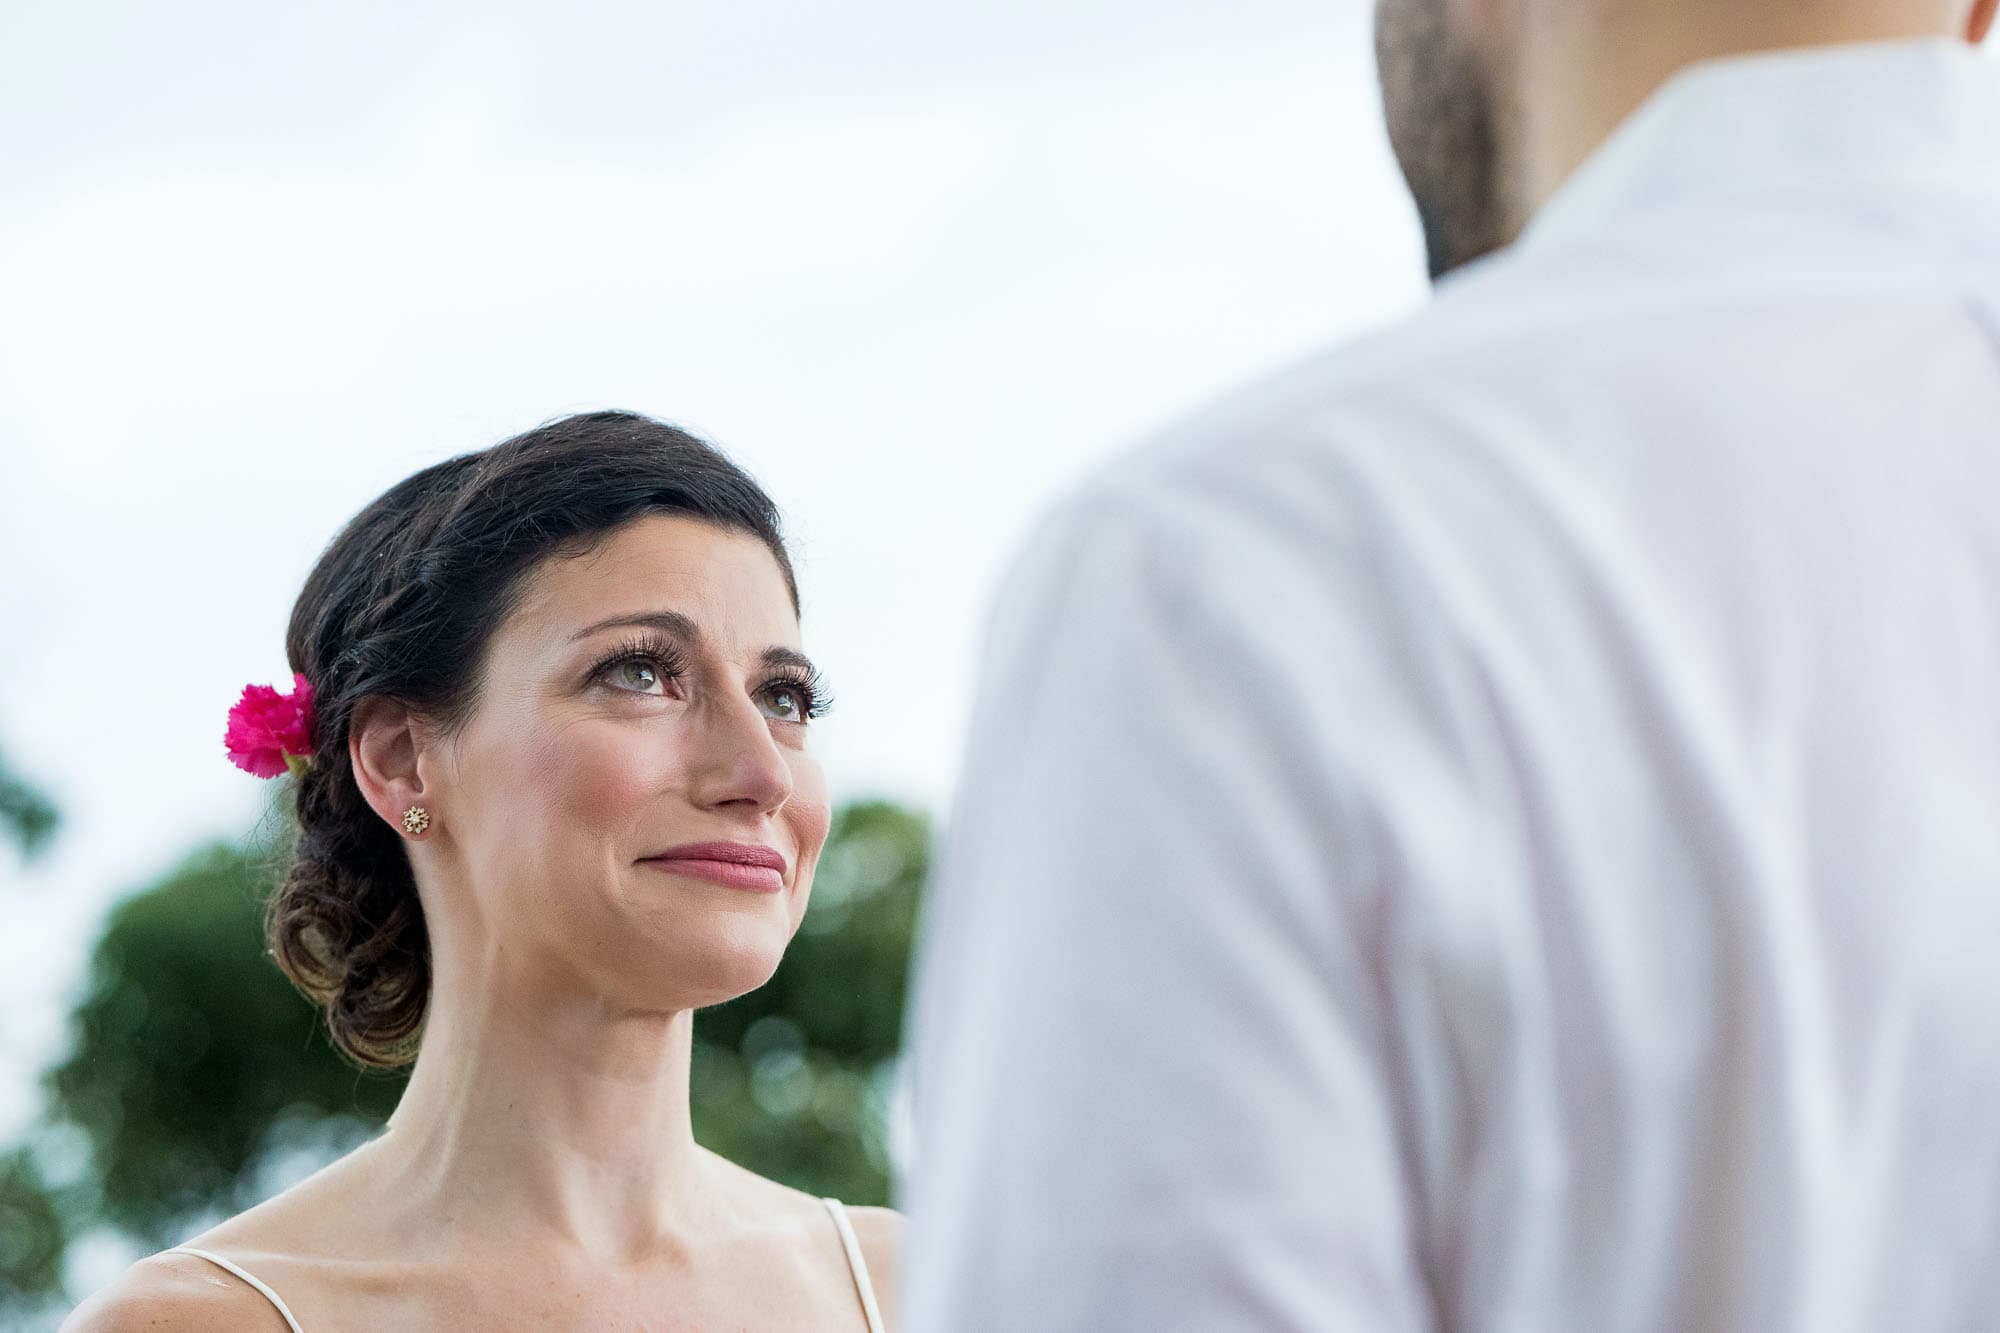 A poignant moment registers on the bride's face during the costa rica elopement ceremony